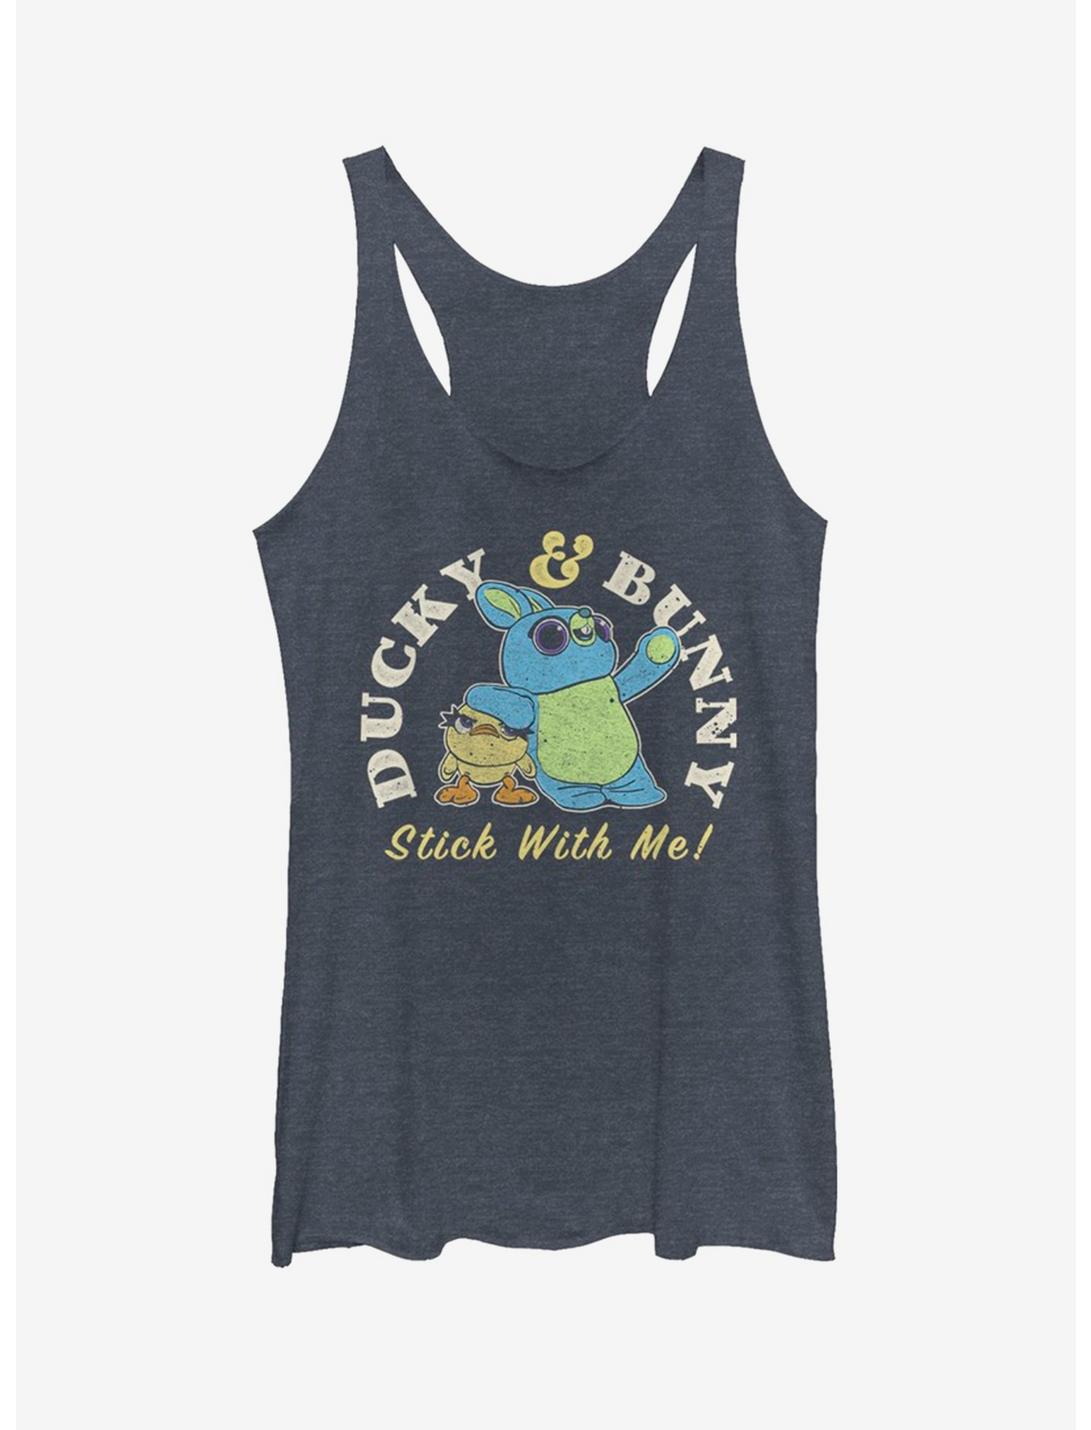 Disney Pixar Toy Story 4 Ducky Bunny Stick With Me Womens Tank Top, NAVY HTR, hi-res